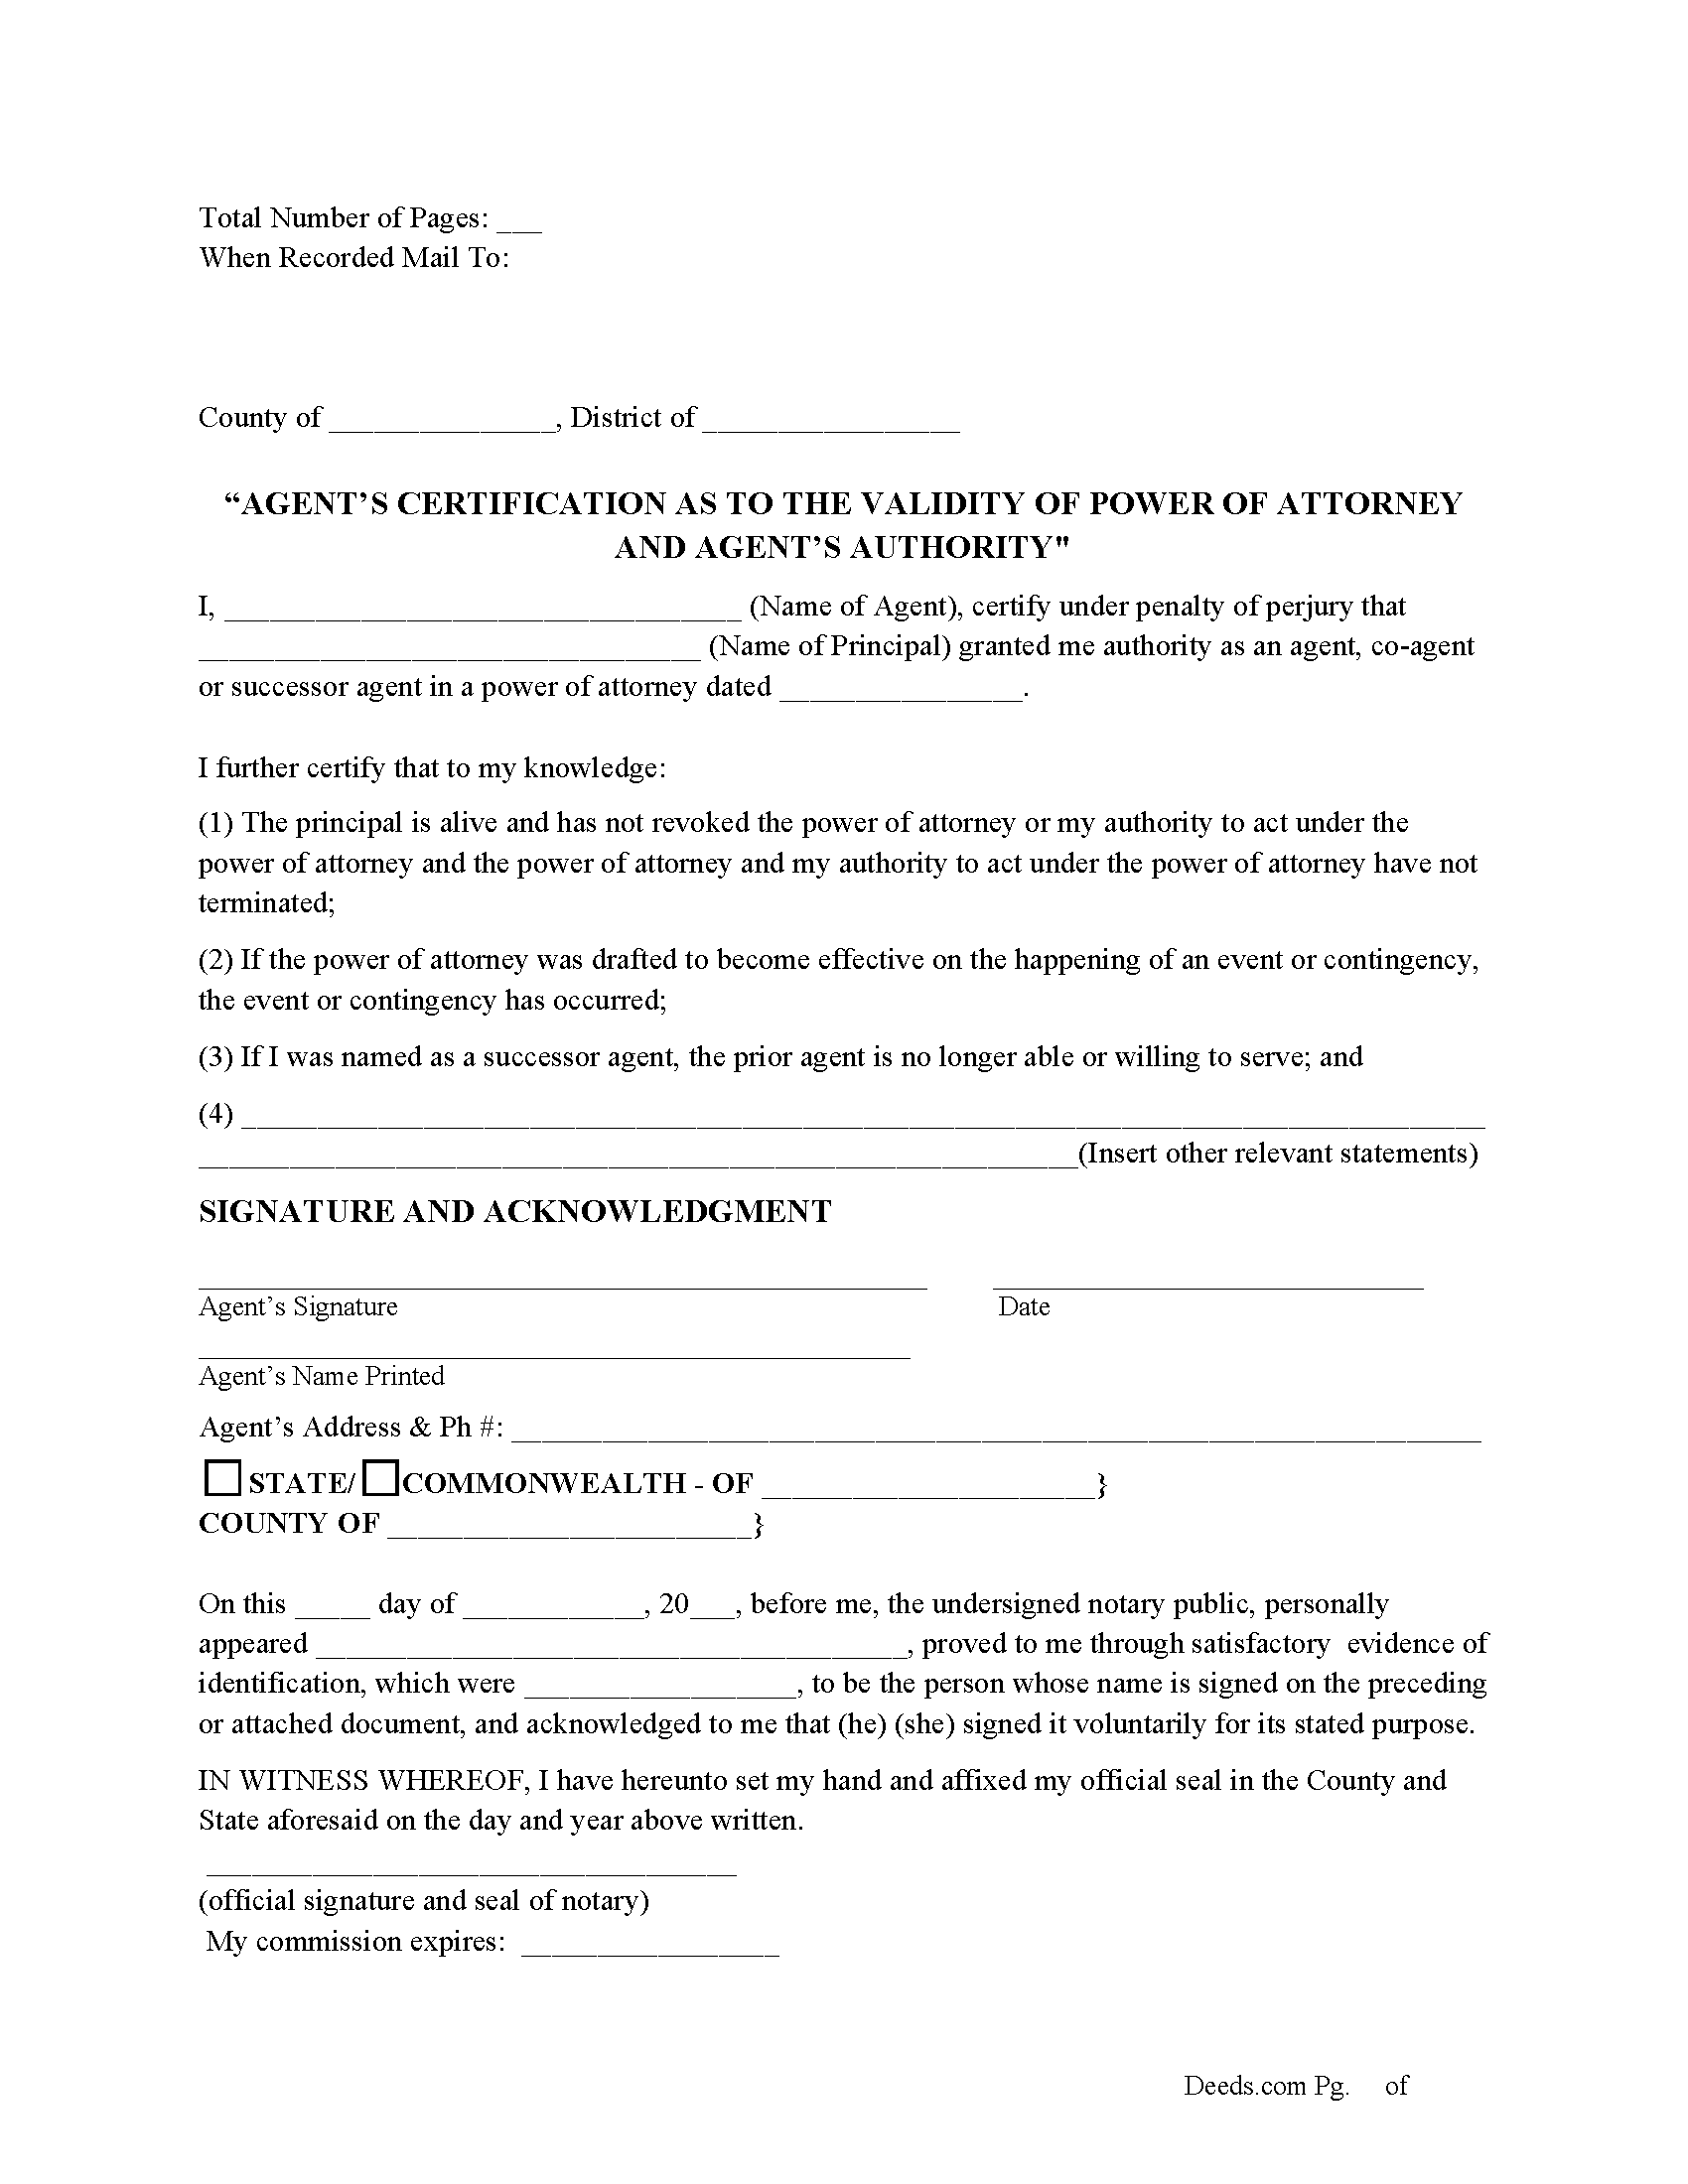 Agents Certification Form